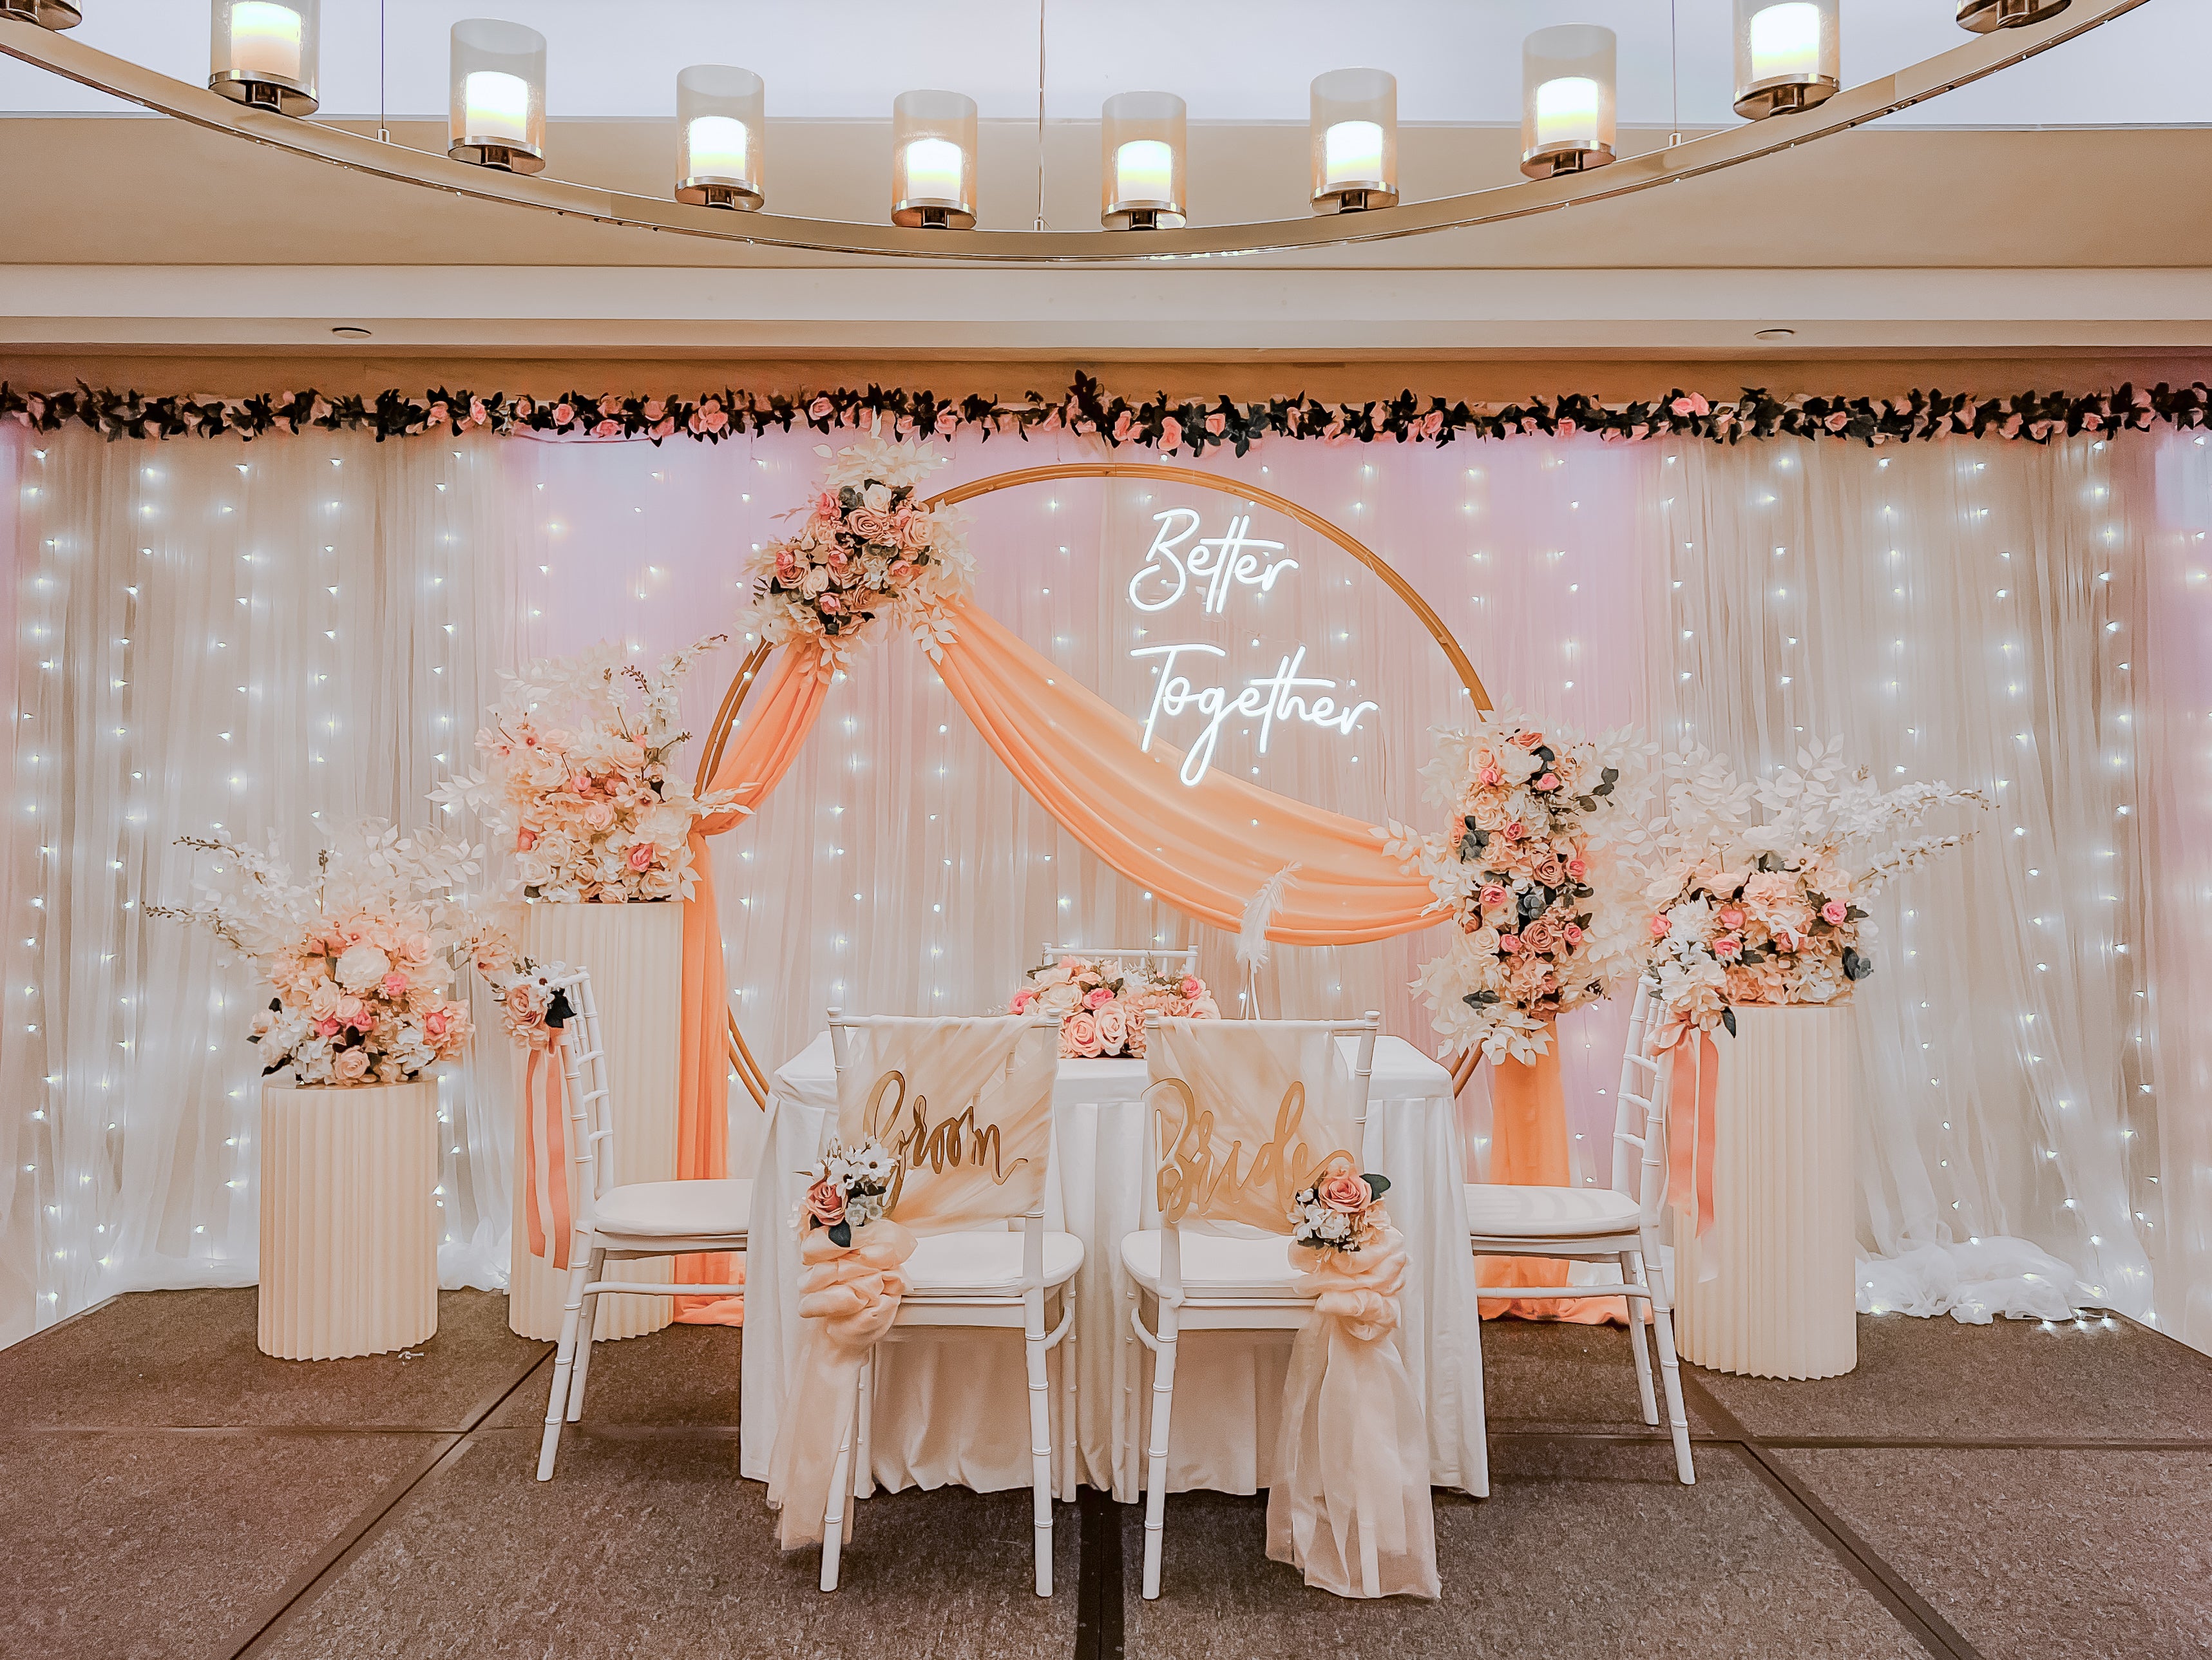 Sweet and Elegant Ballroom Stage Solemnisation/ROM Decor in Singapore - Pink White Peach Theme with Round Arch & Fairy-lights (Venue: Carlton Hotel Sg) 